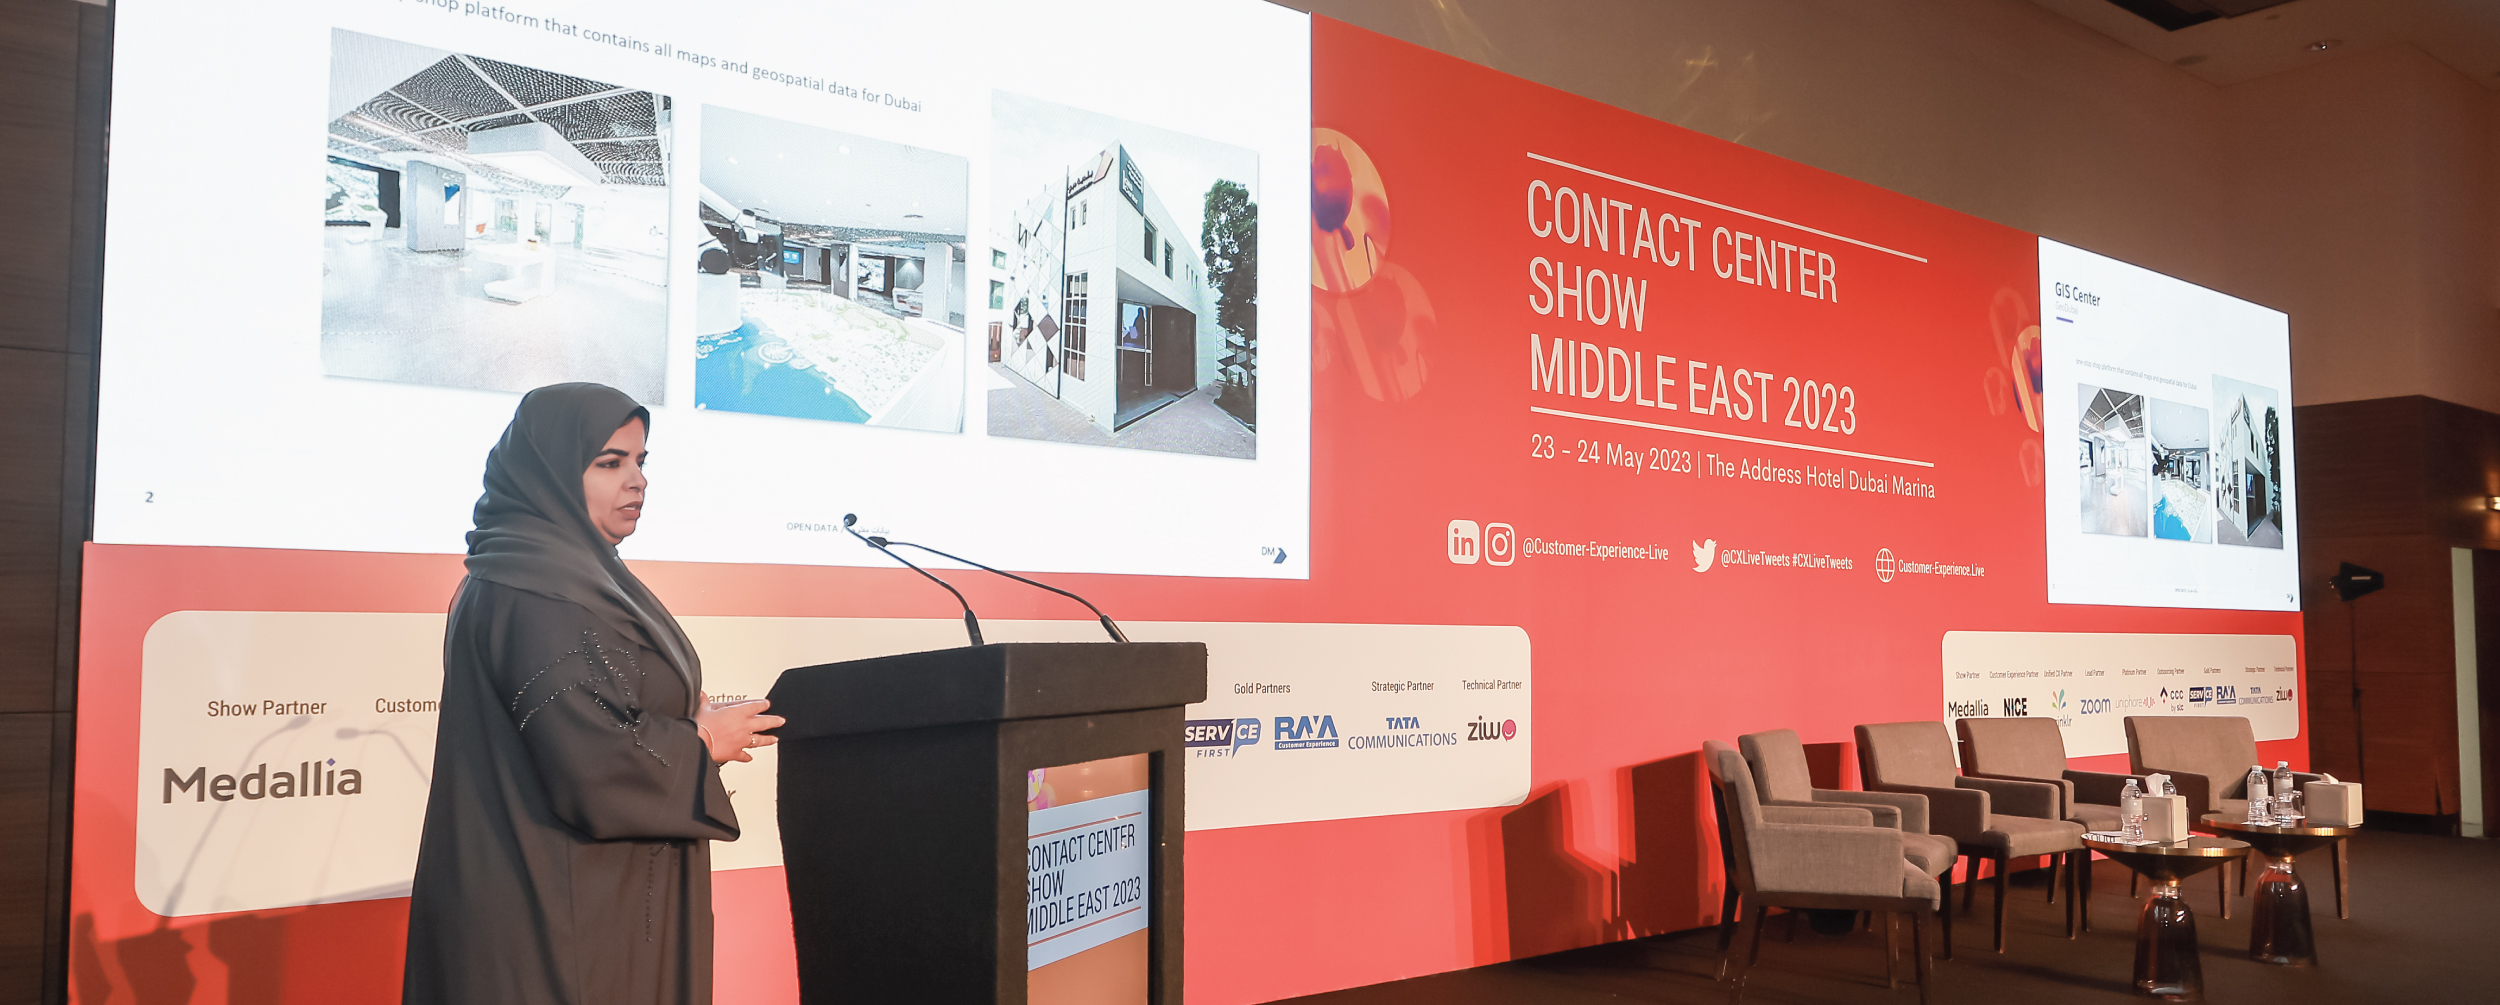 Contact Center Show Middle East 2023 Conference 